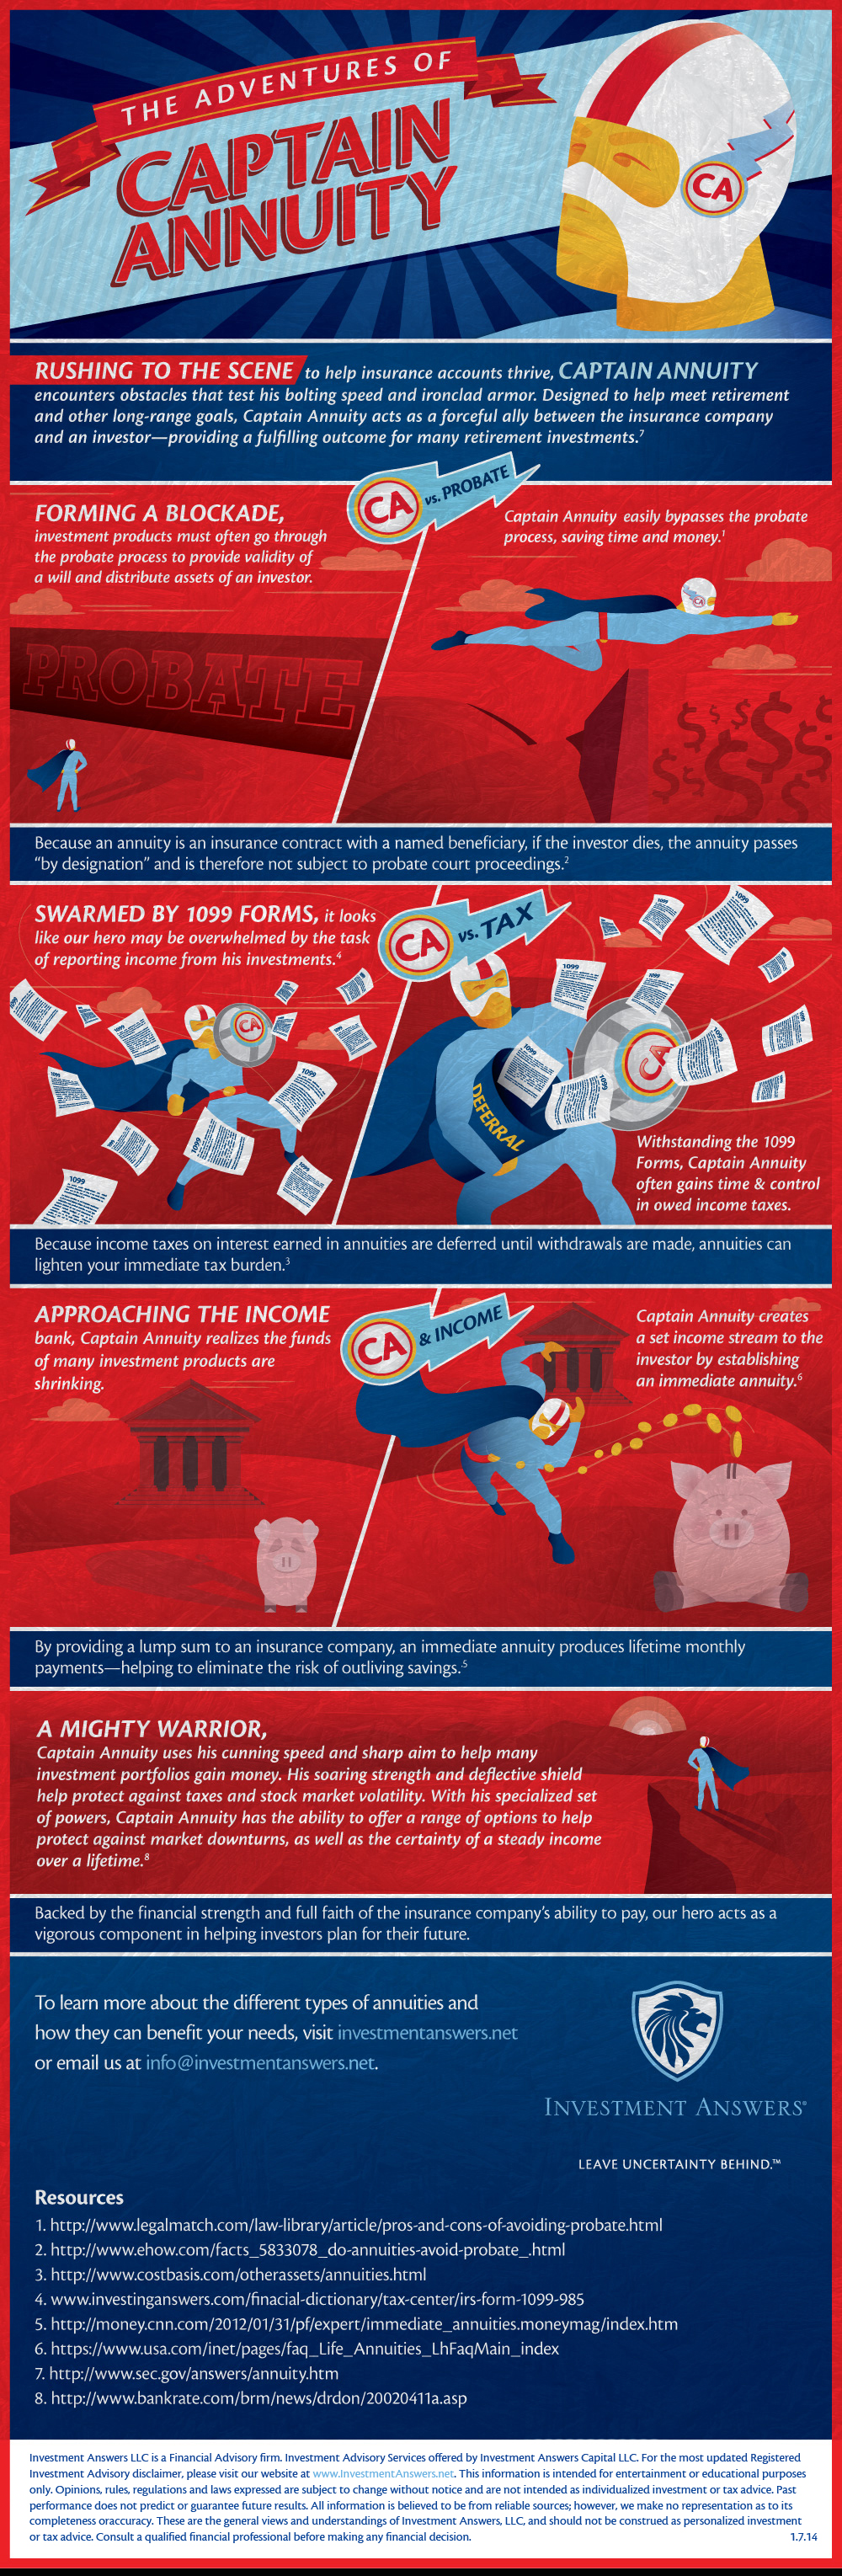 CaptainAnnuity_infographic_Final_1.7.14